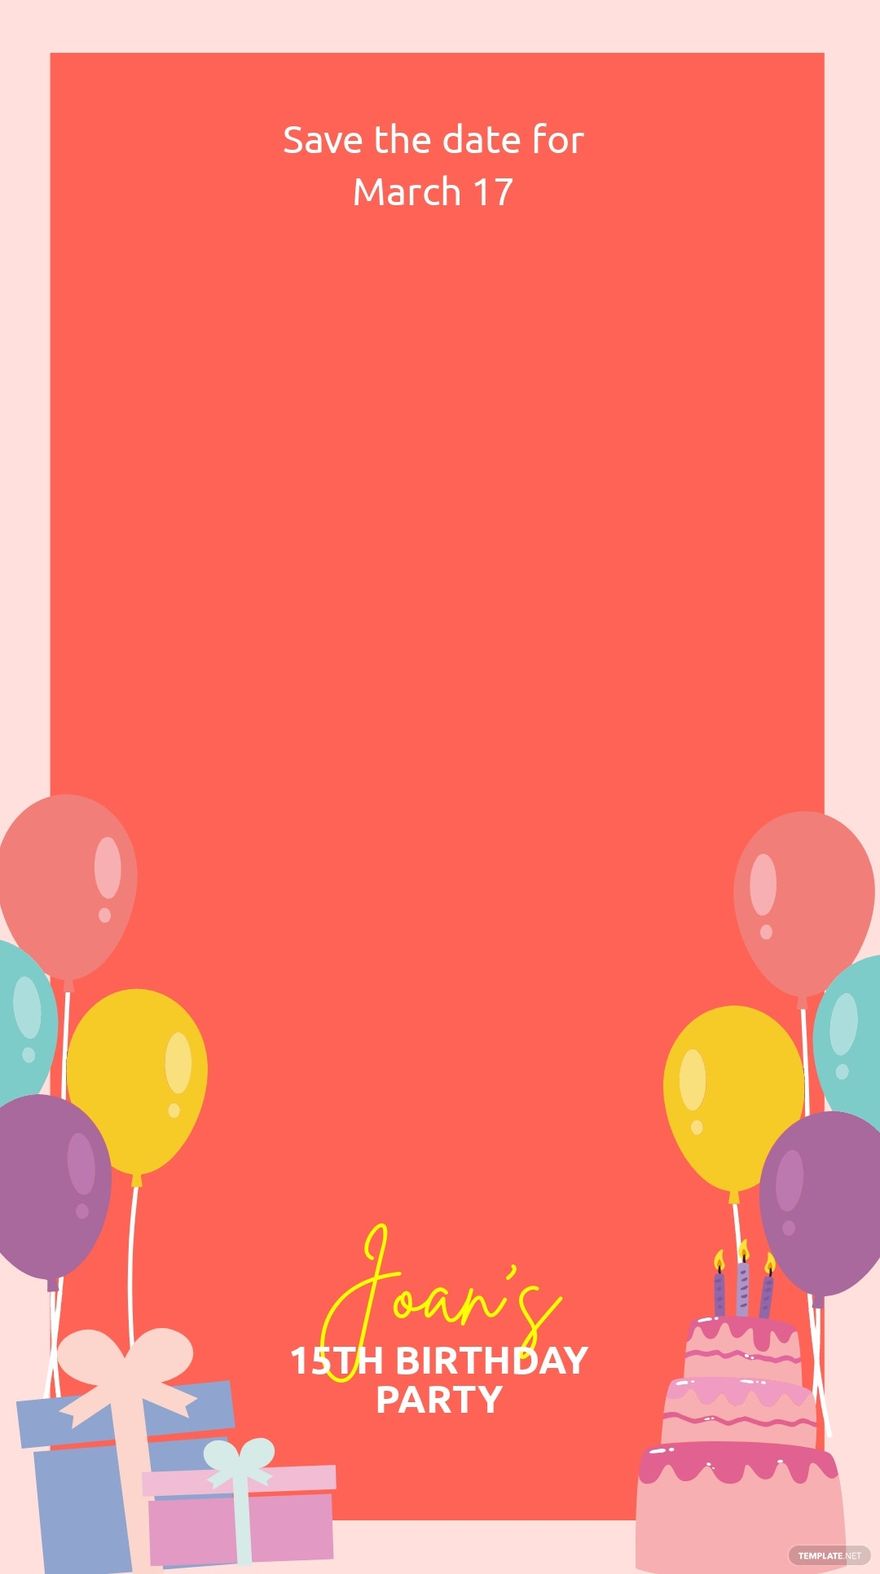 Save The Date Party Snapchat Geofilter Template